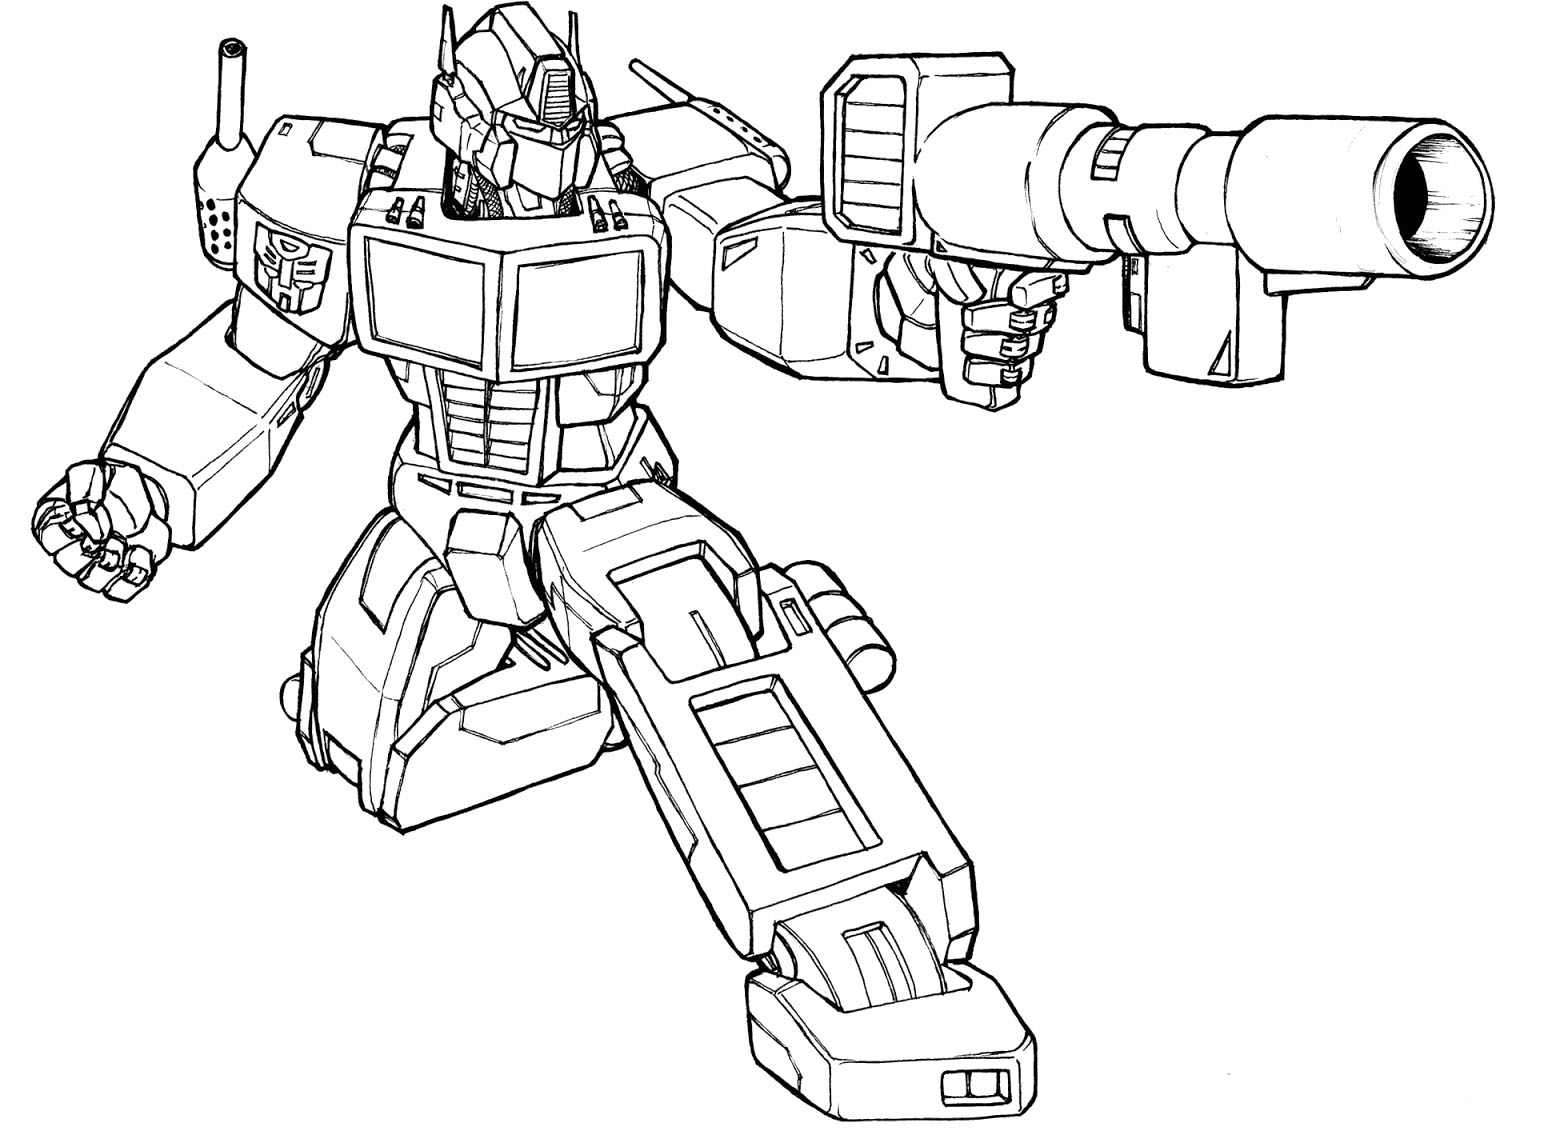 Coloring Pages : Transformers Coloring Sheets Autobot Pagessformer - Transformers 4 Coloring Pages Free Printable